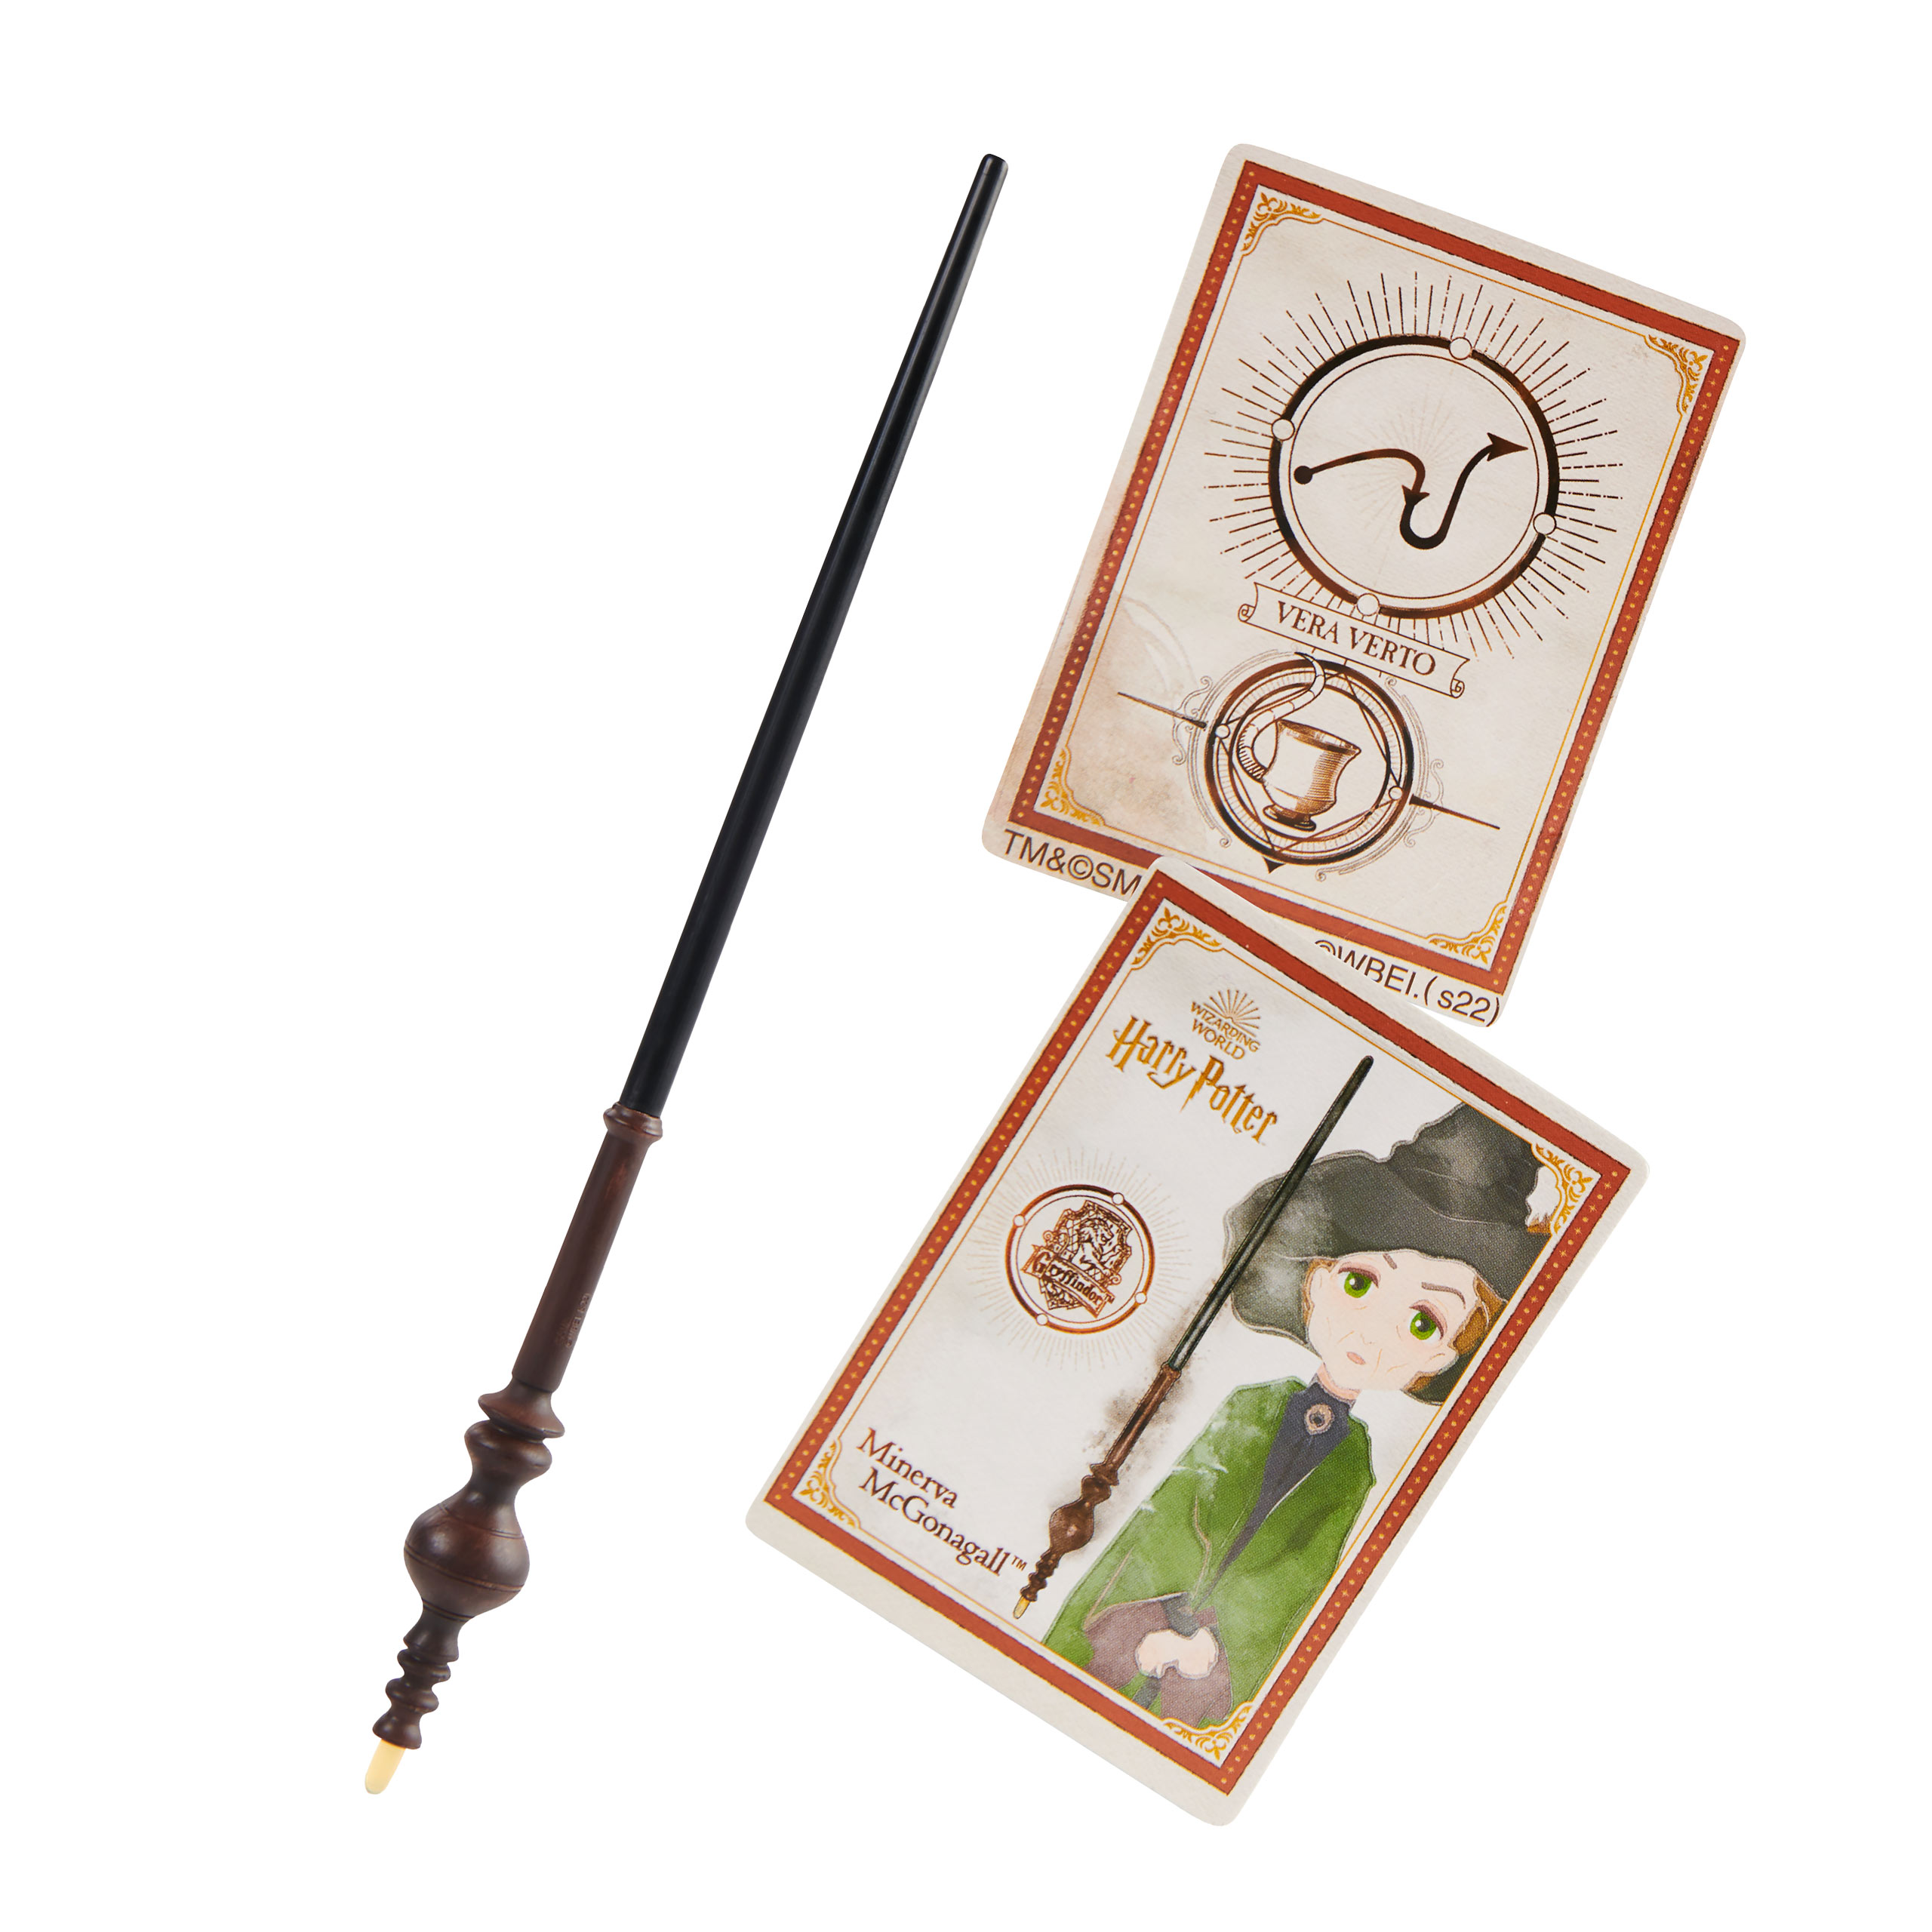 Harry Potter - Professor McGonagall Wand with Spell Card